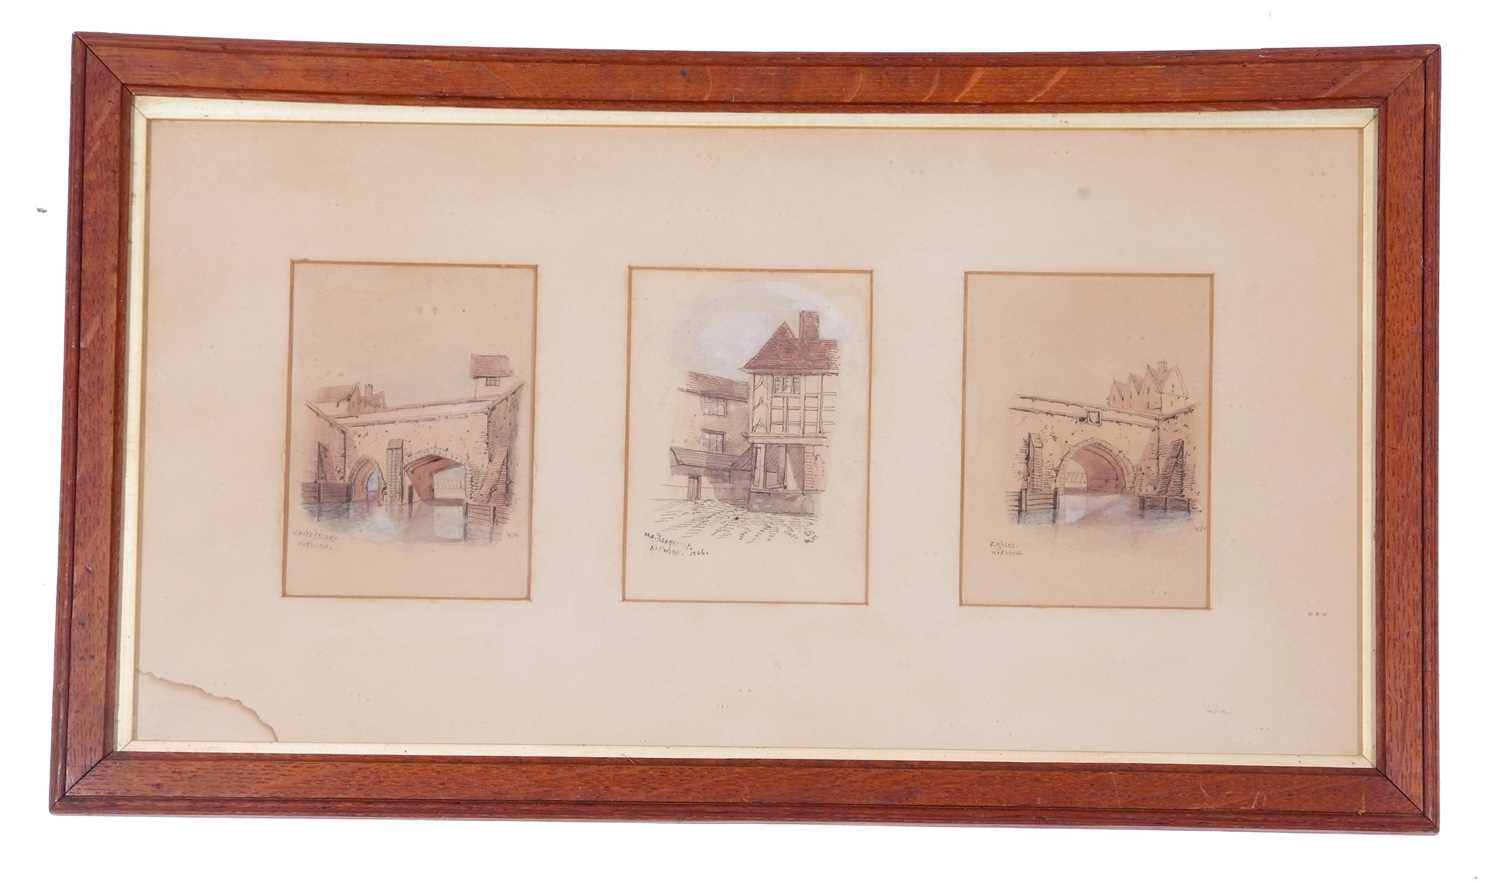 Edward Pococke (British, 1846-1905), three panelled pen and ink sketches: St Giles, Fishmongers - Image 2 of 2